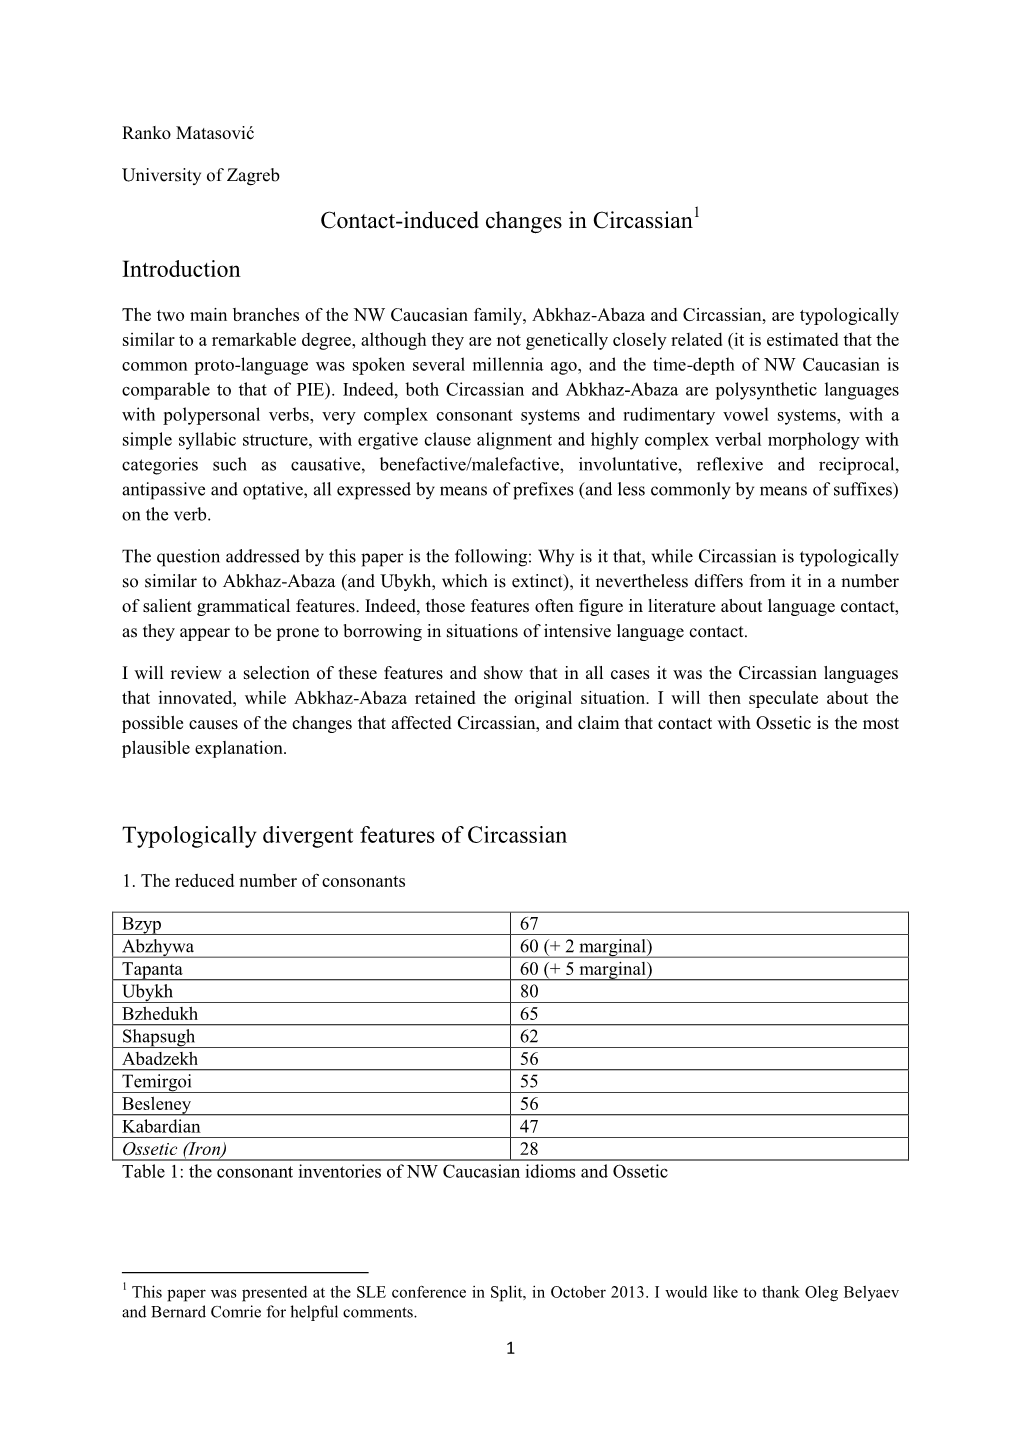 Contact-Induced Changes in Circassian Introduction